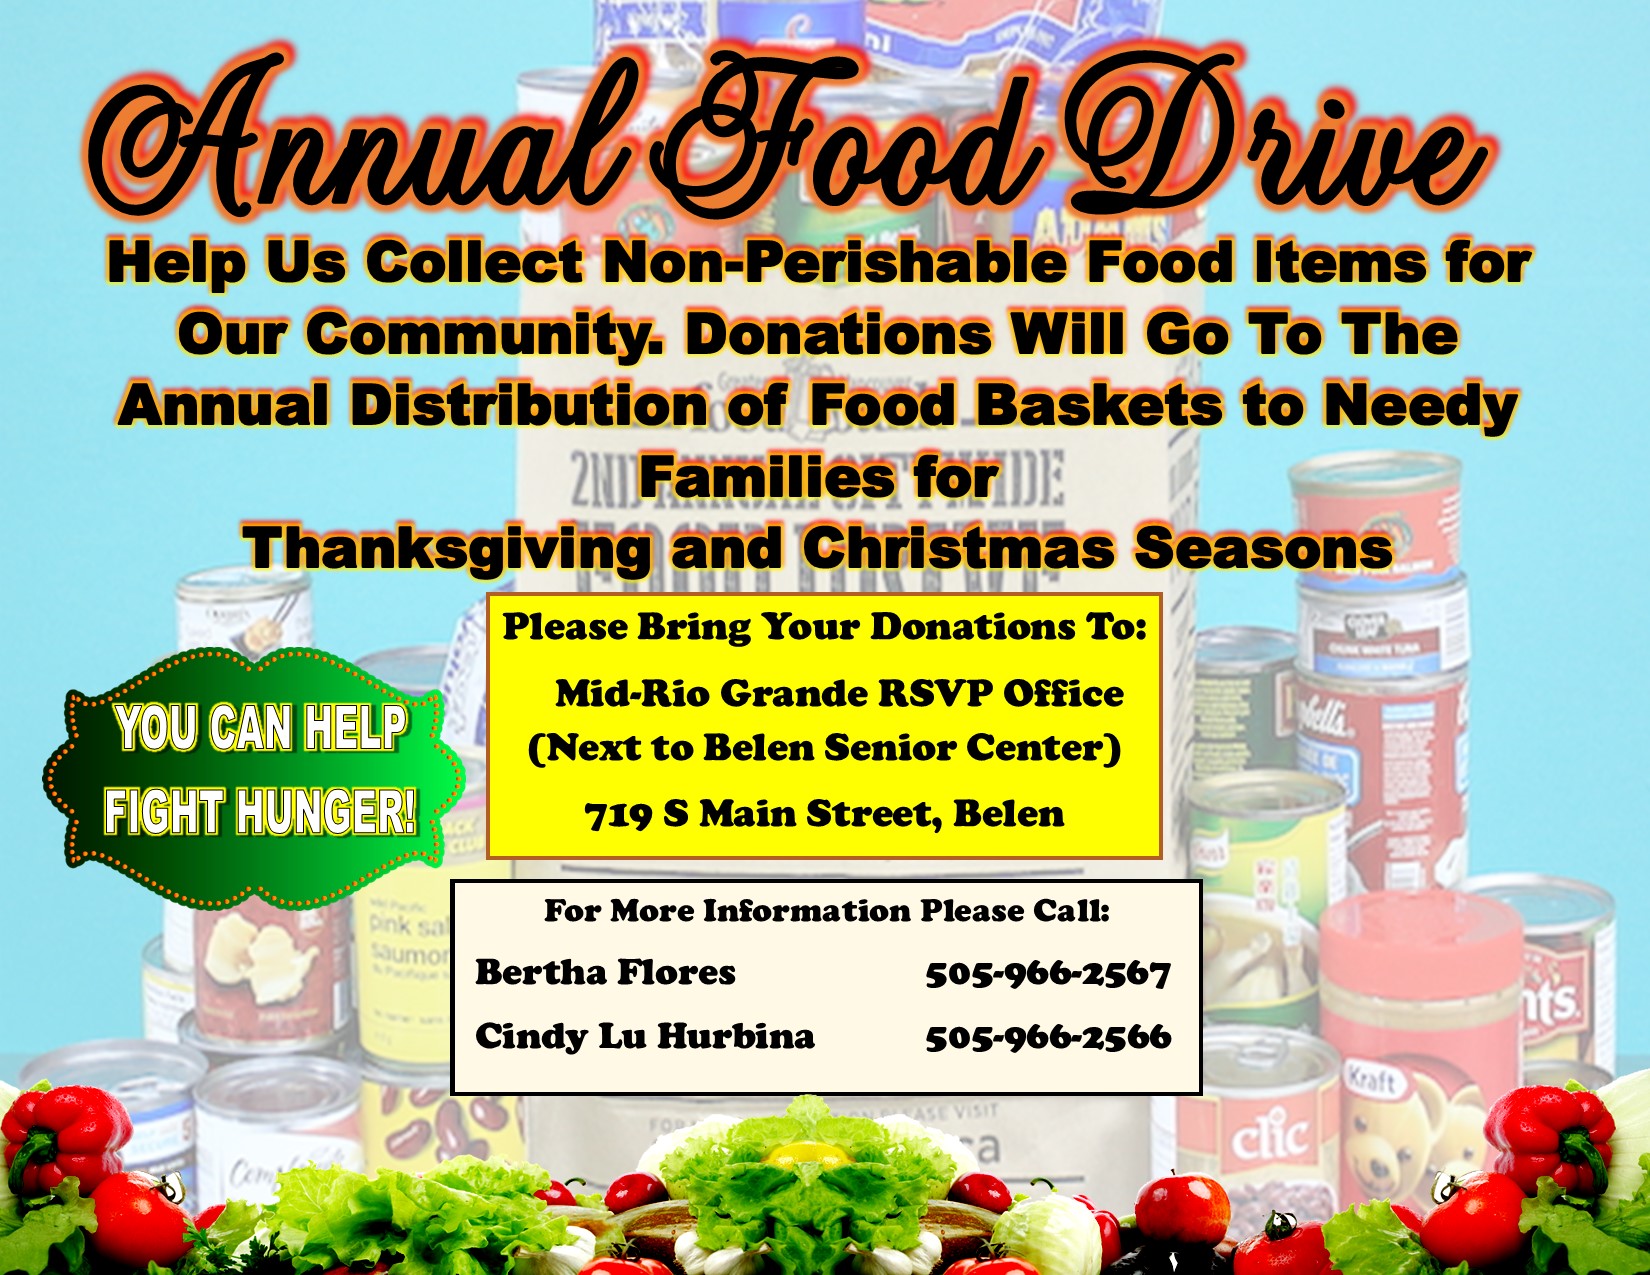 Help us collect non-perishable food items for our community. Donations will go to the annual distribution of food baskets to needy families for Thanksgiving and Christmas seasons. Please bring your donations to Mid-Rio Grande RSVP Office 719 S Main Street, Belen